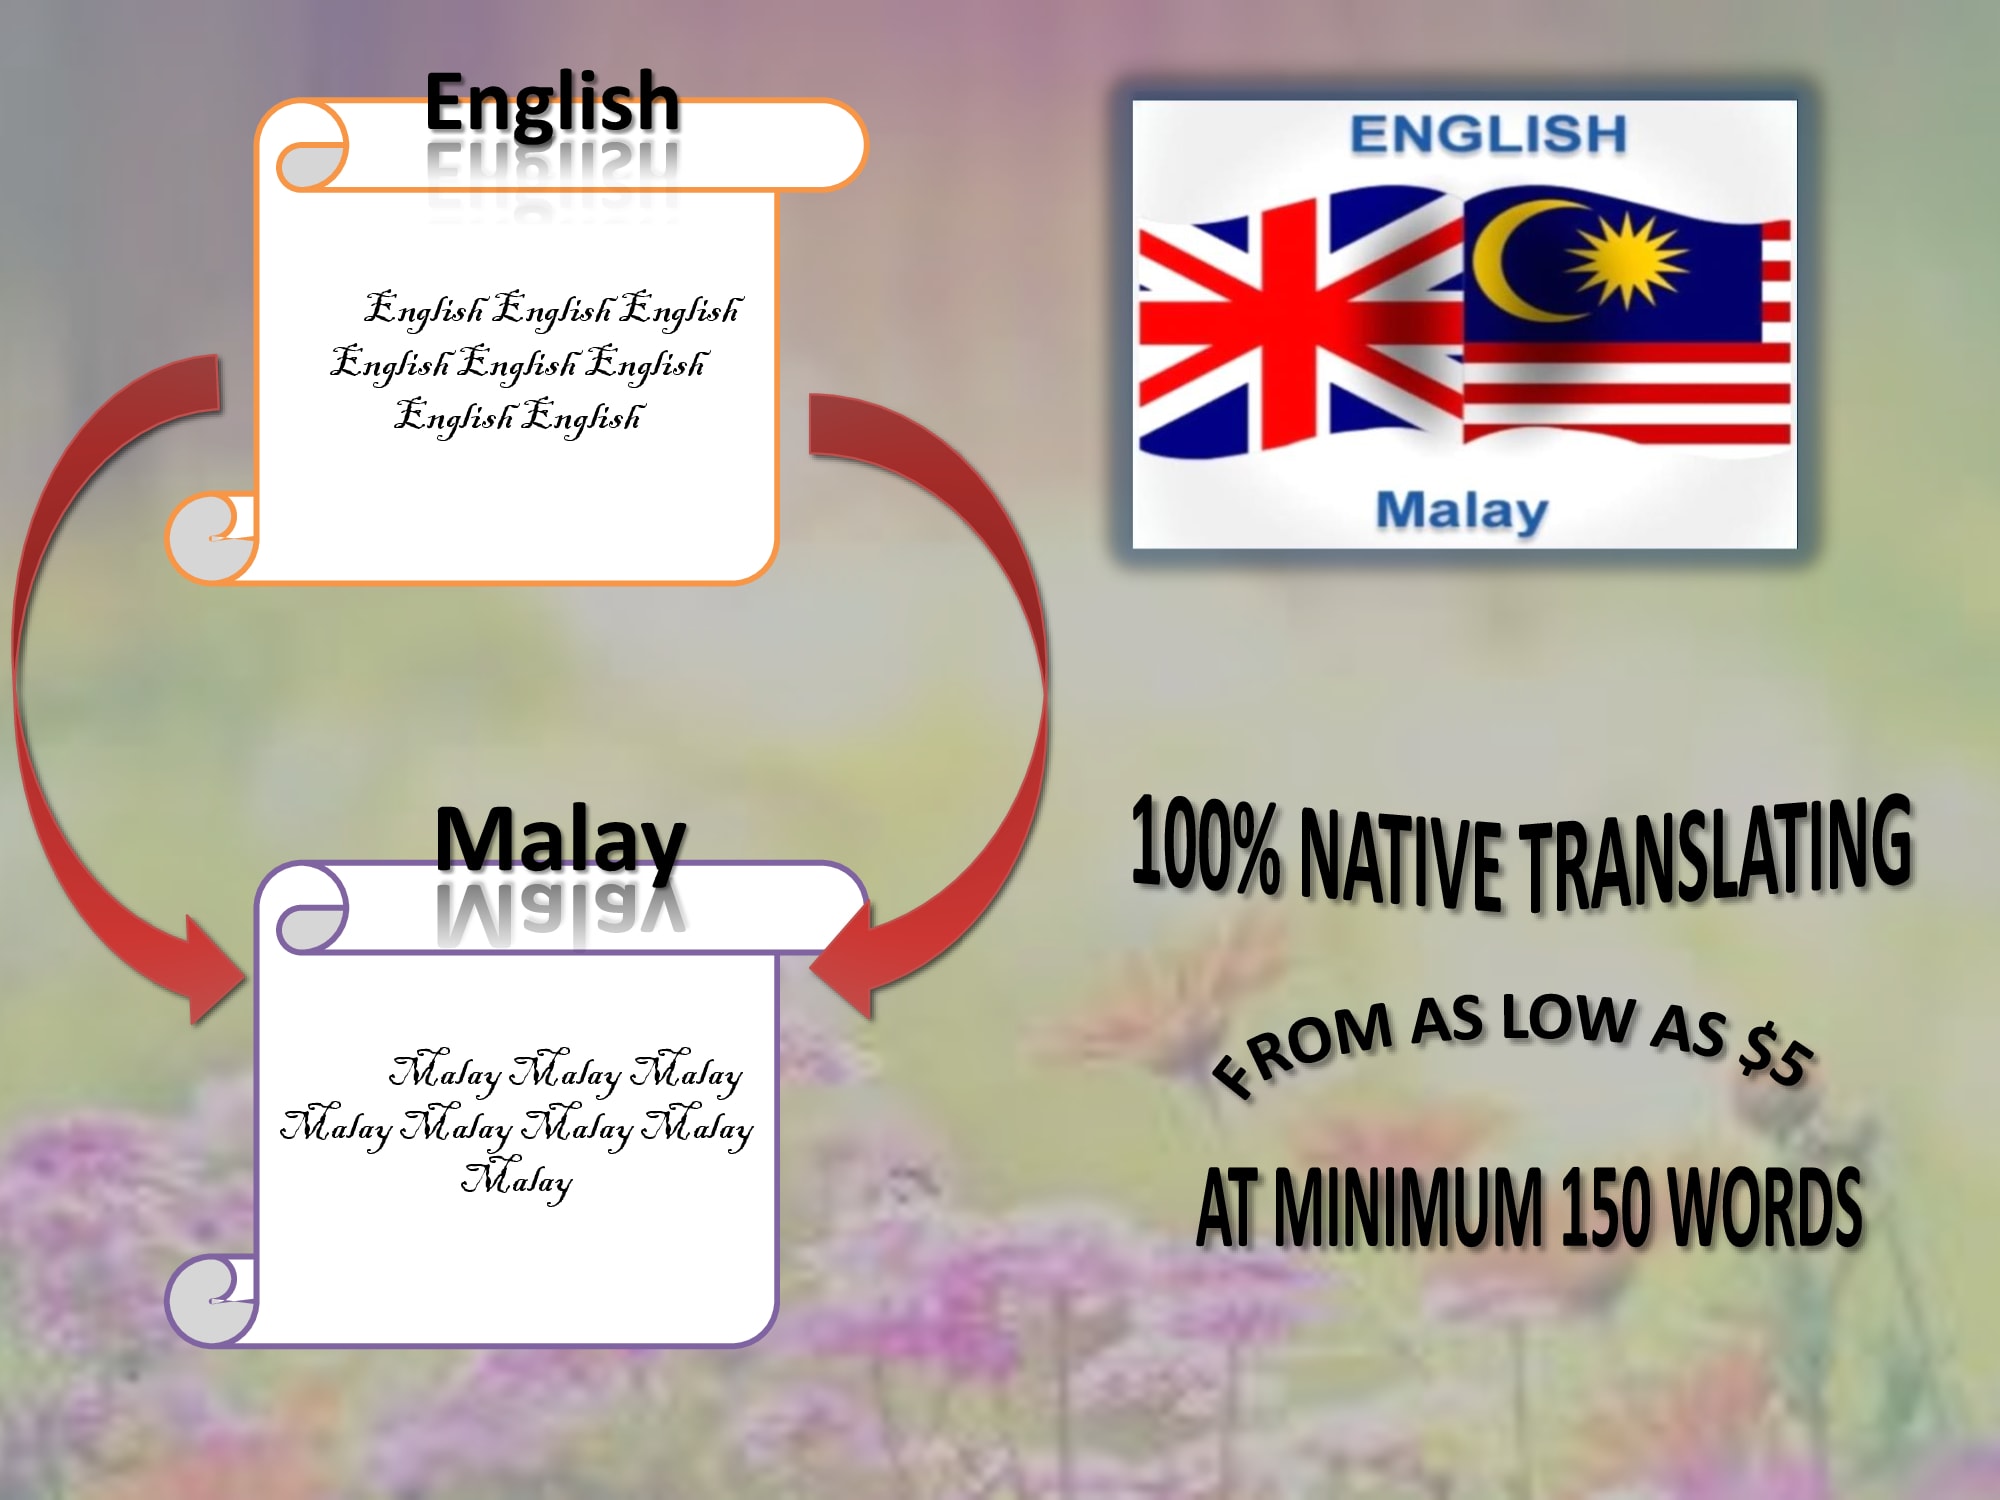 Native meaning in malay